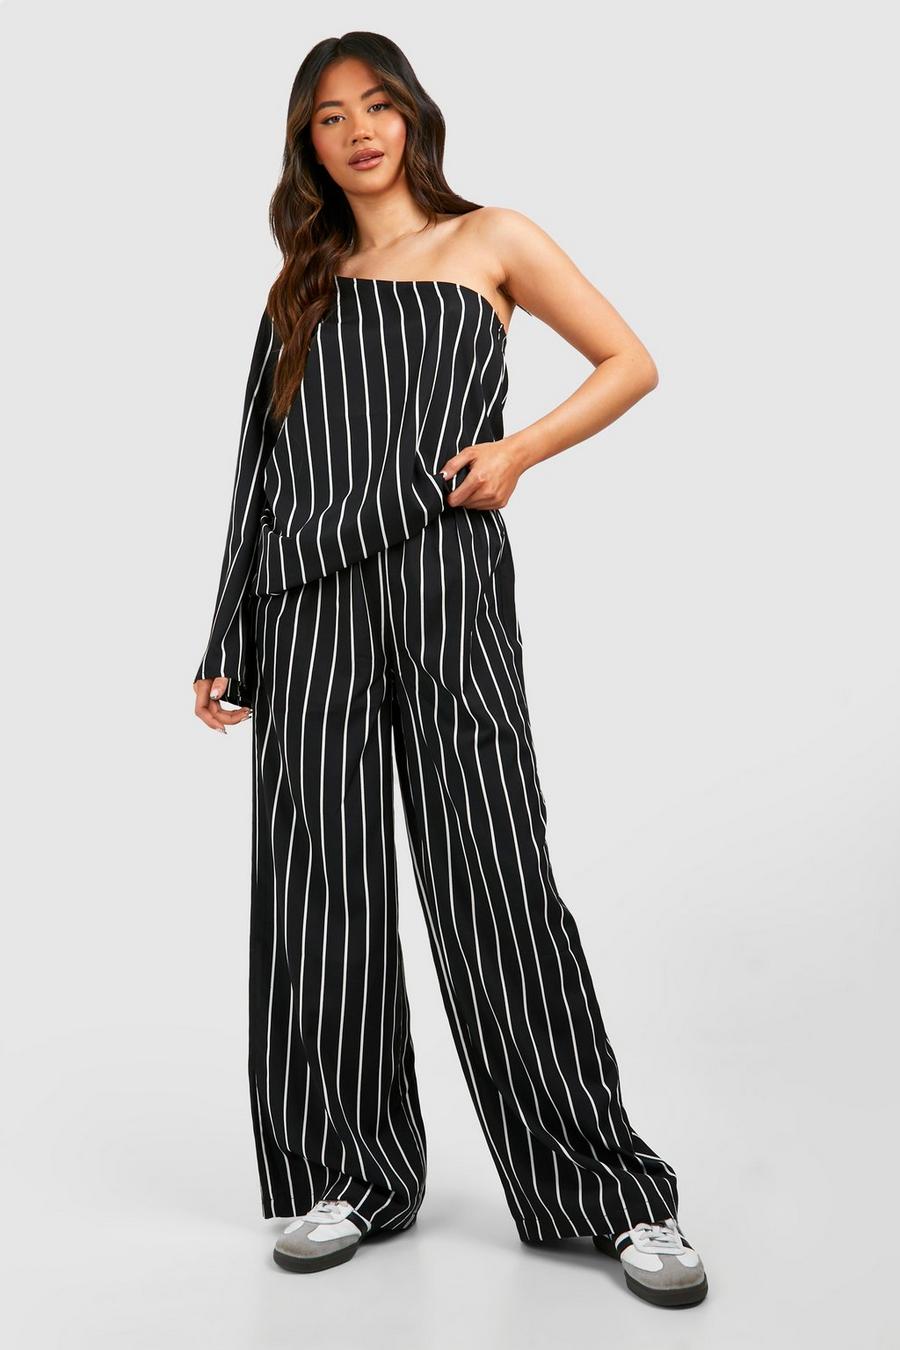 Black Stripe Top And Pants Two-Piece image number 1